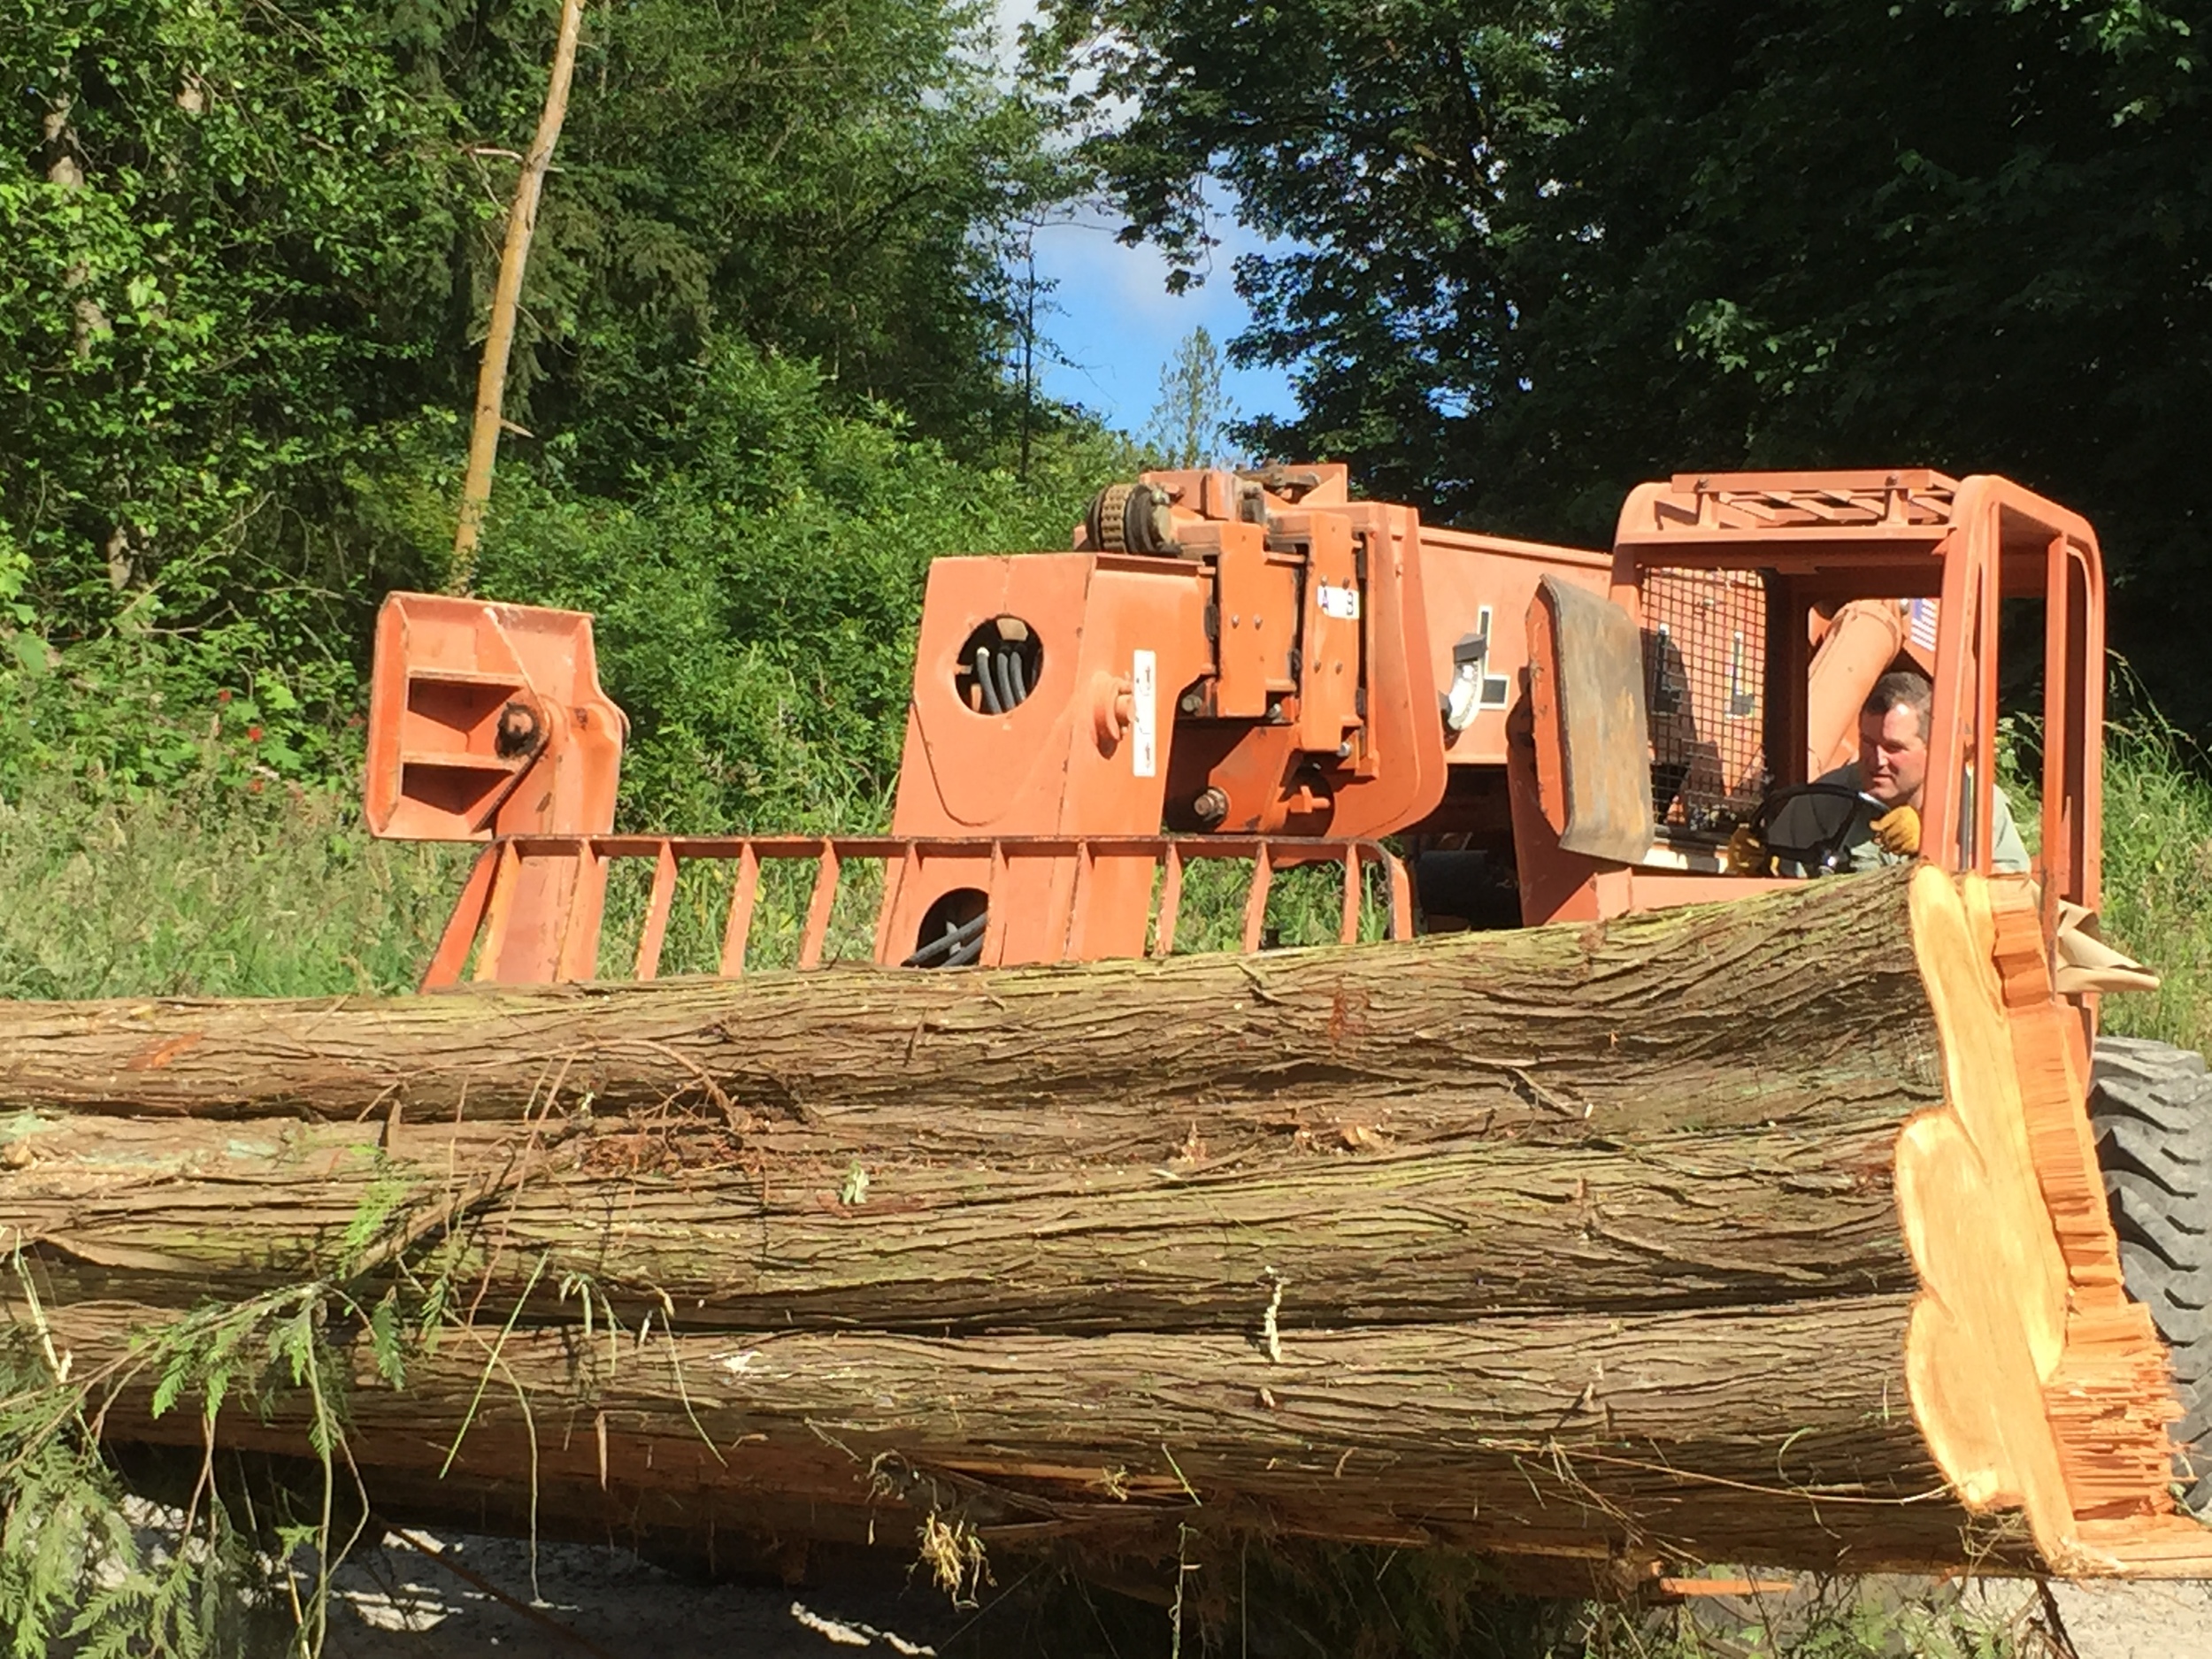   Here is my dad operating the fork lift, moving the cedar logs to the mill after we had dragged them out with the tractor. One thing I've learned about the Wilcoxs on the farm is that they can operate any kind of machinery, no matter how old or new.